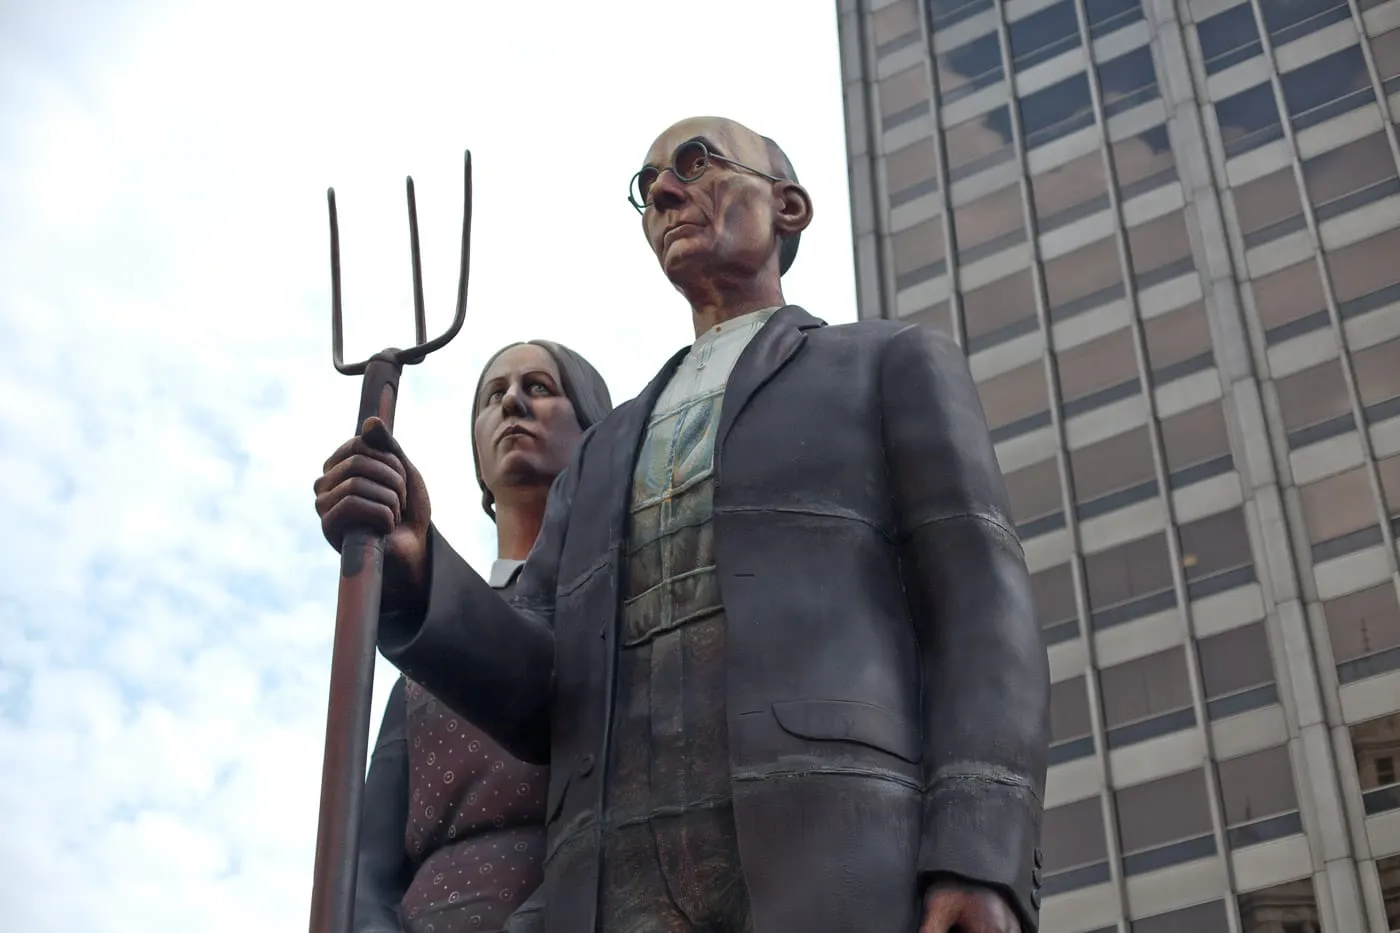 God Bless America - American Gothic Statue by J. Seward Johnson - in Chicago, Illinois.